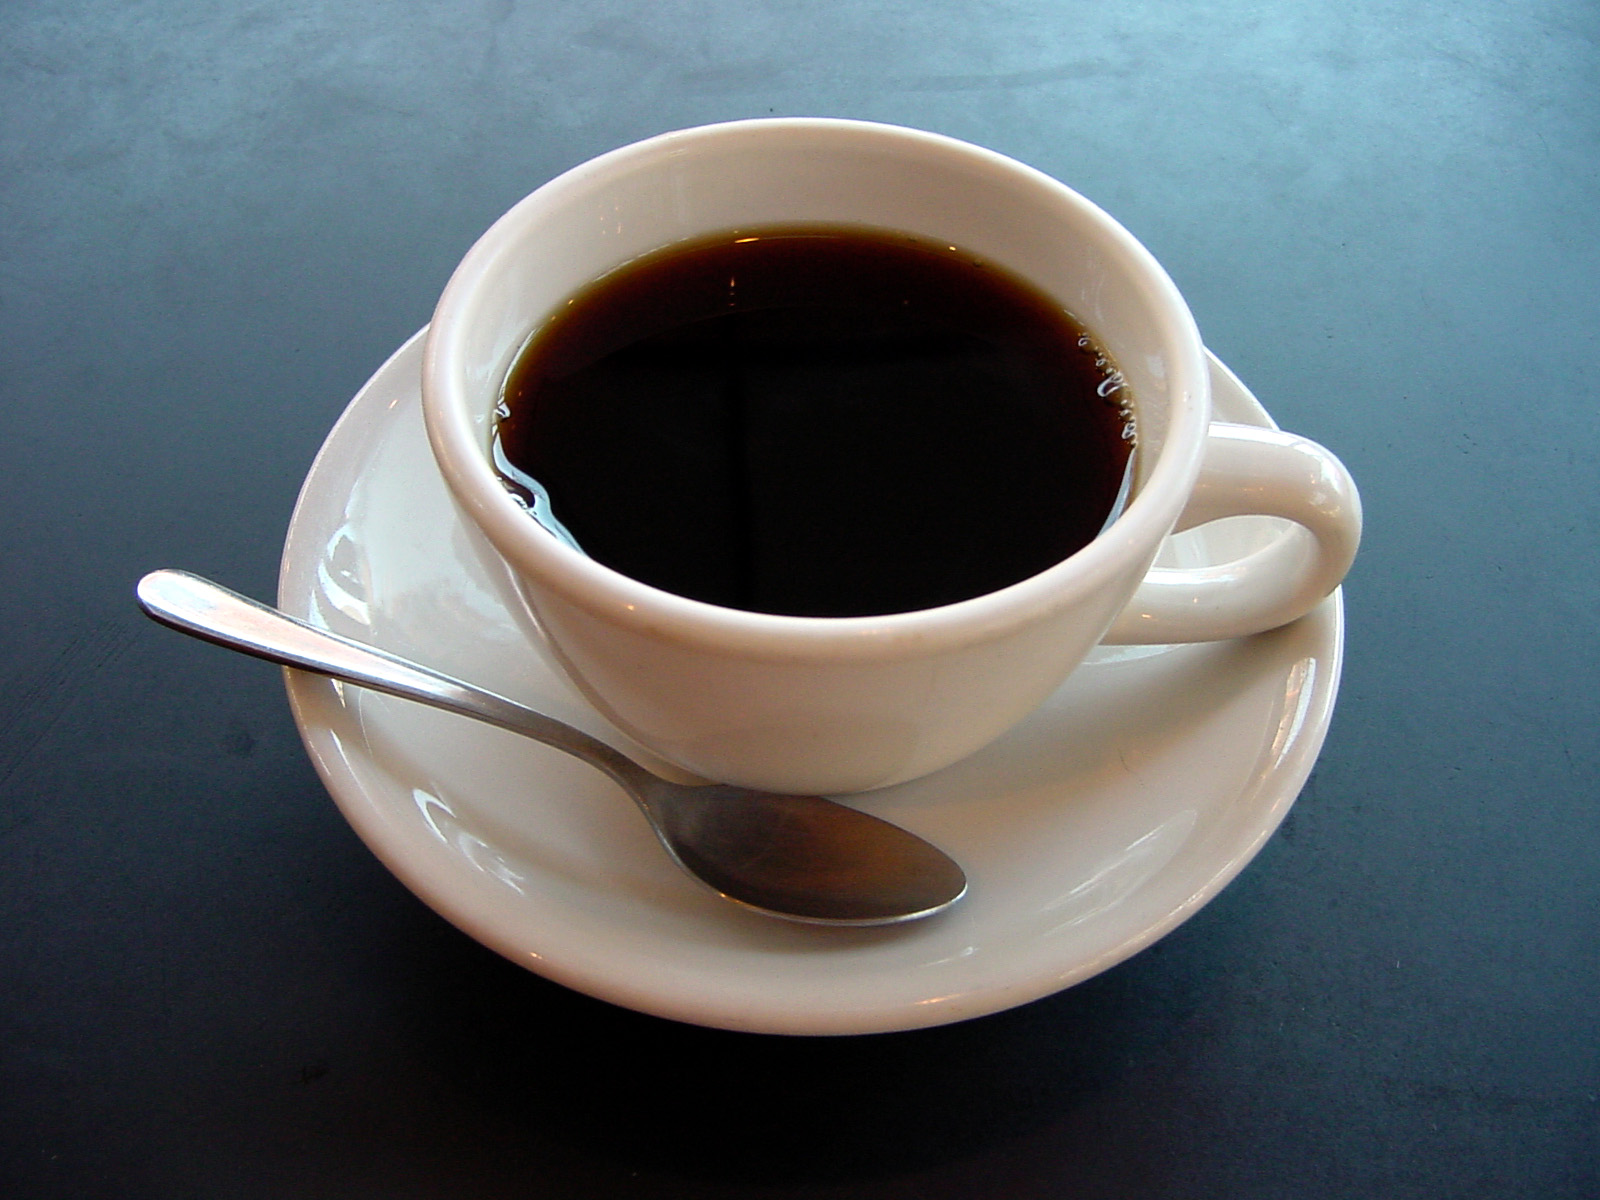 How many tablespoons in a cup of coffee by different sizes?